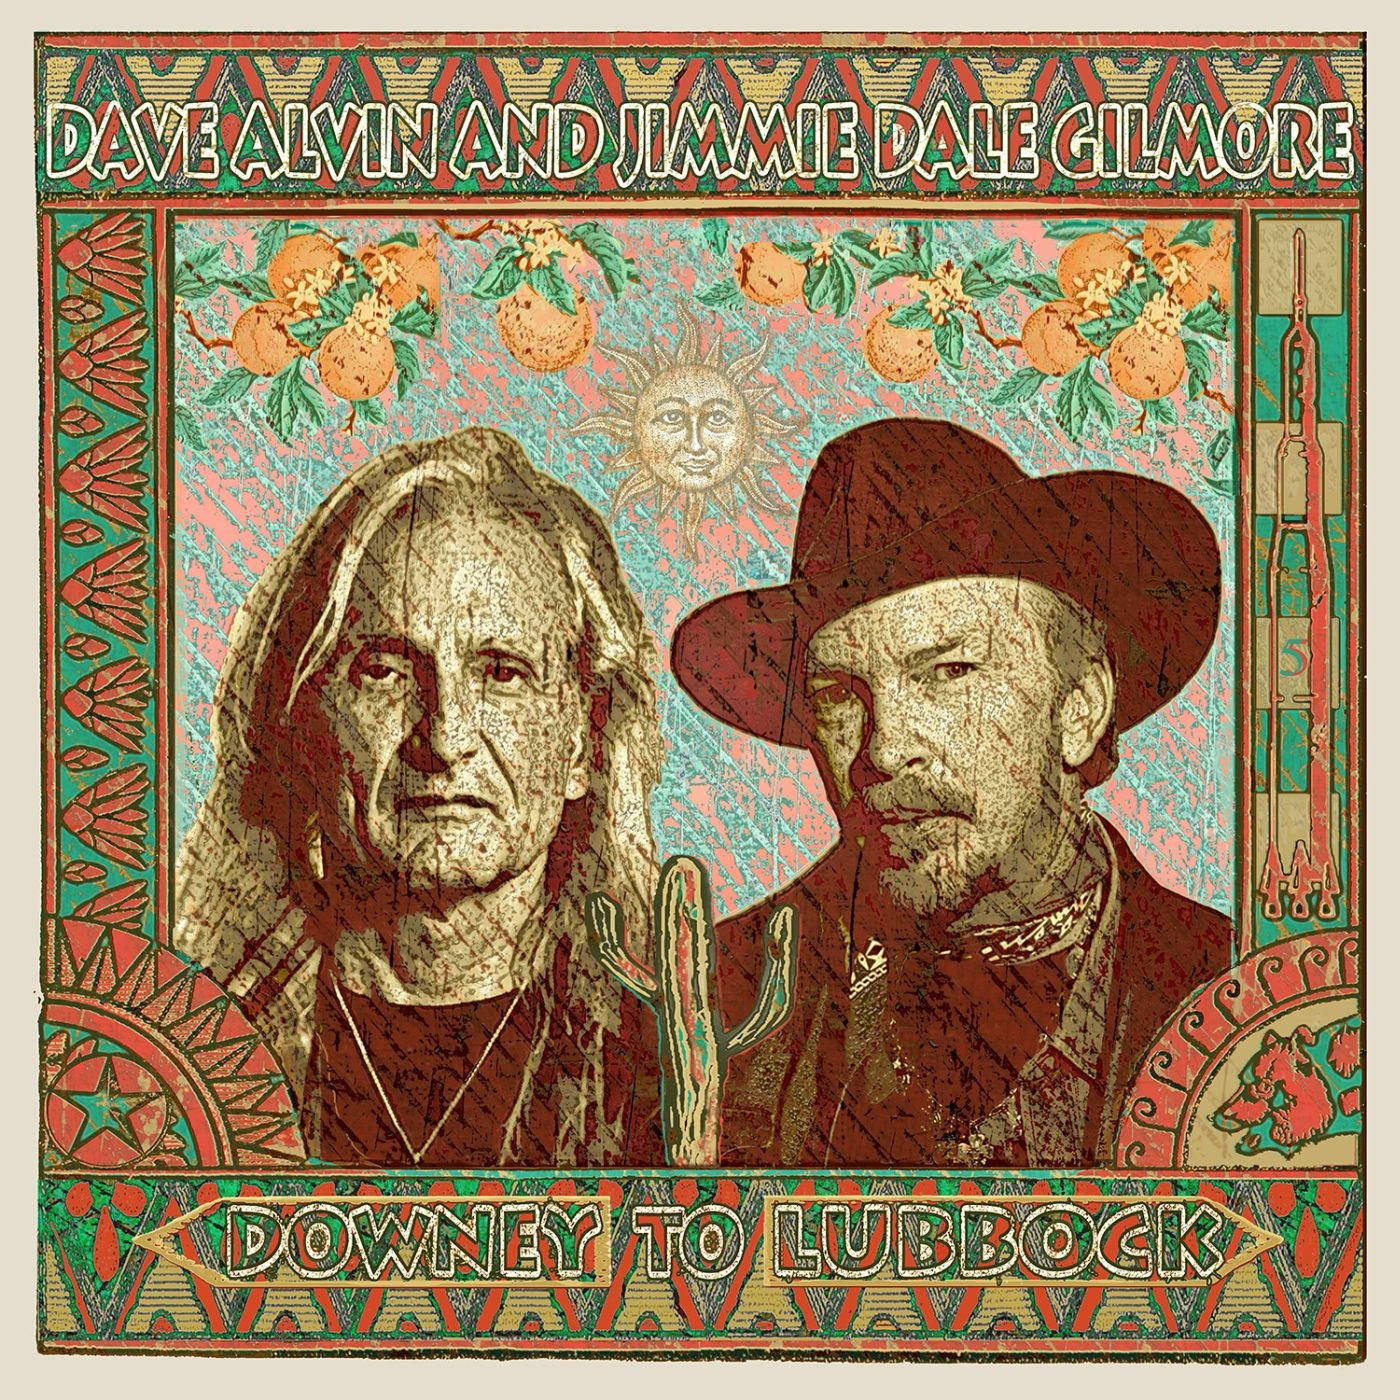 Dave Alvin and Jimmie Dale Gilmore - Downey to Lubbock (2018) [FLAC 24bit/44,1kHz]